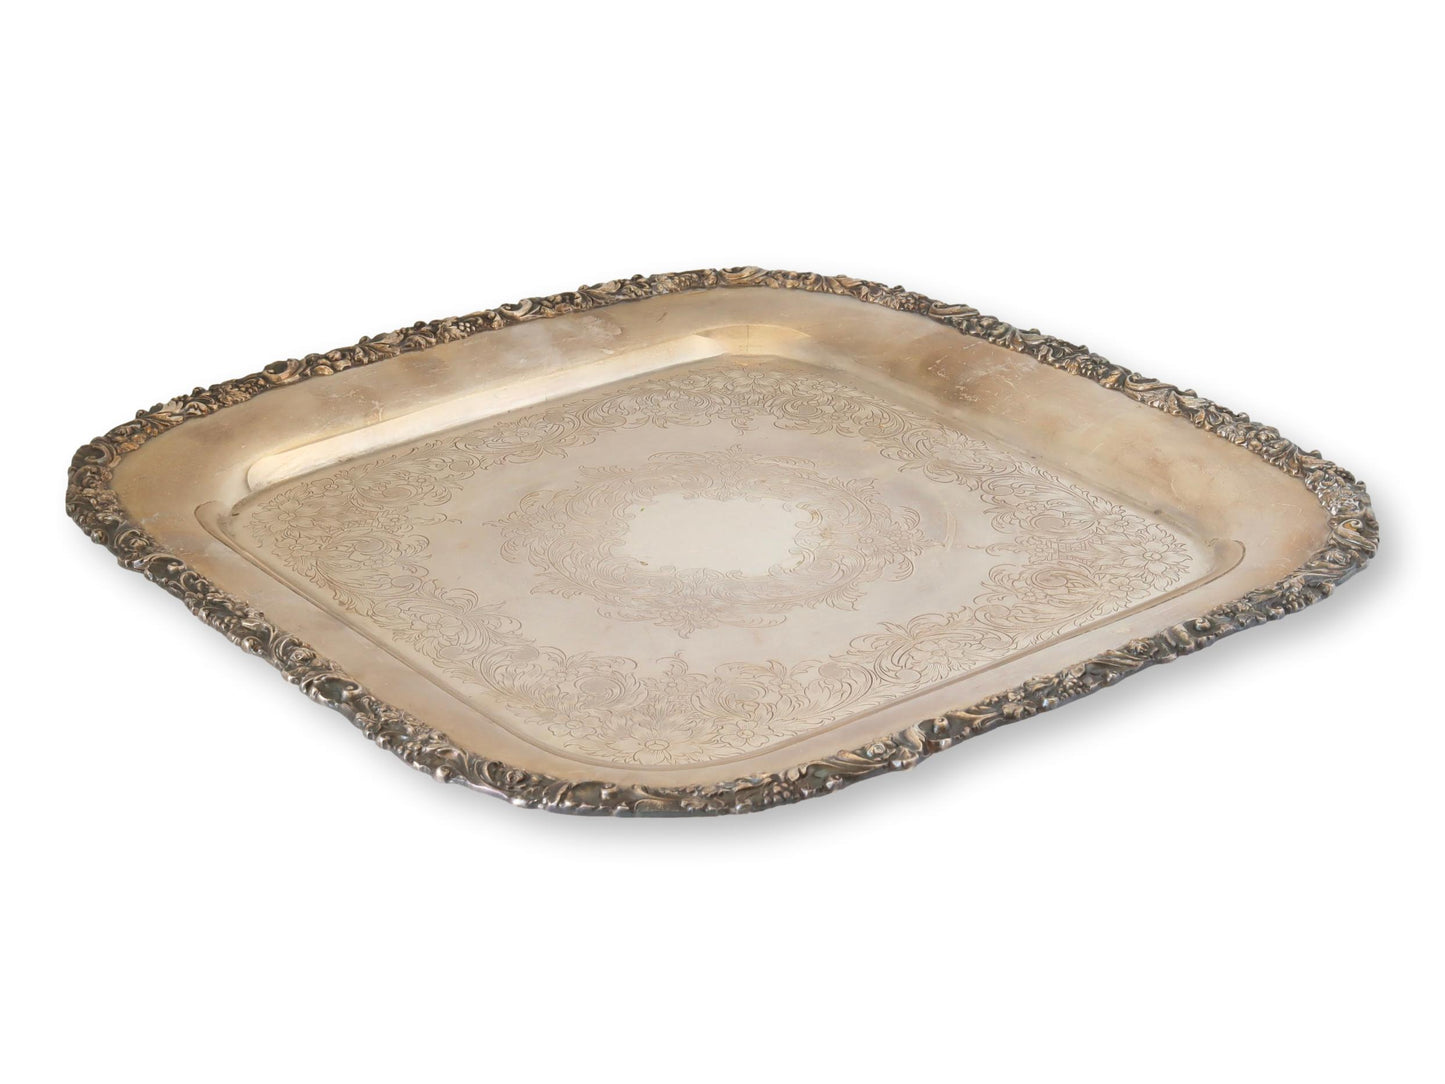 English Silver-Plate Serving / Bar Tray